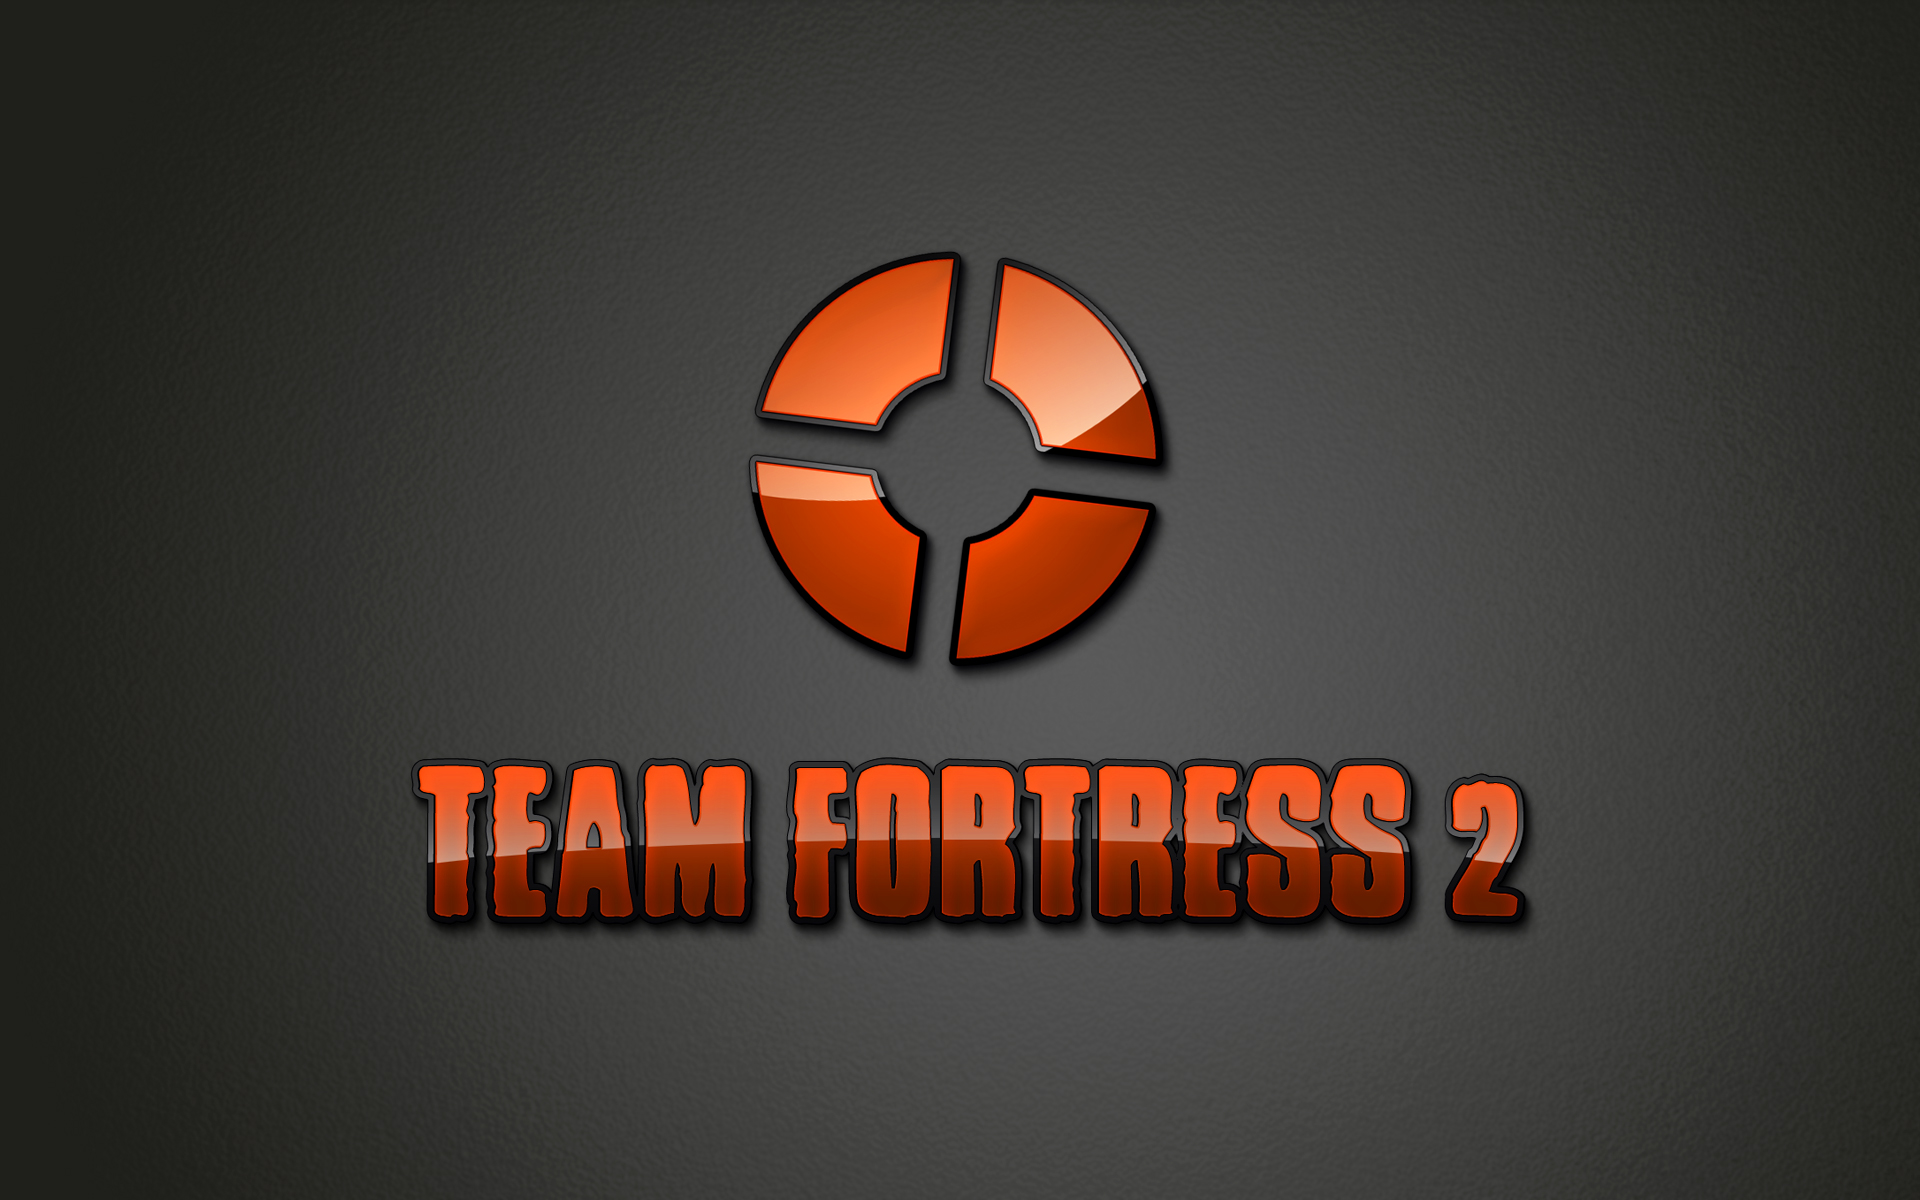 team_fortress_2_by_mullet-d39uifo.jpg